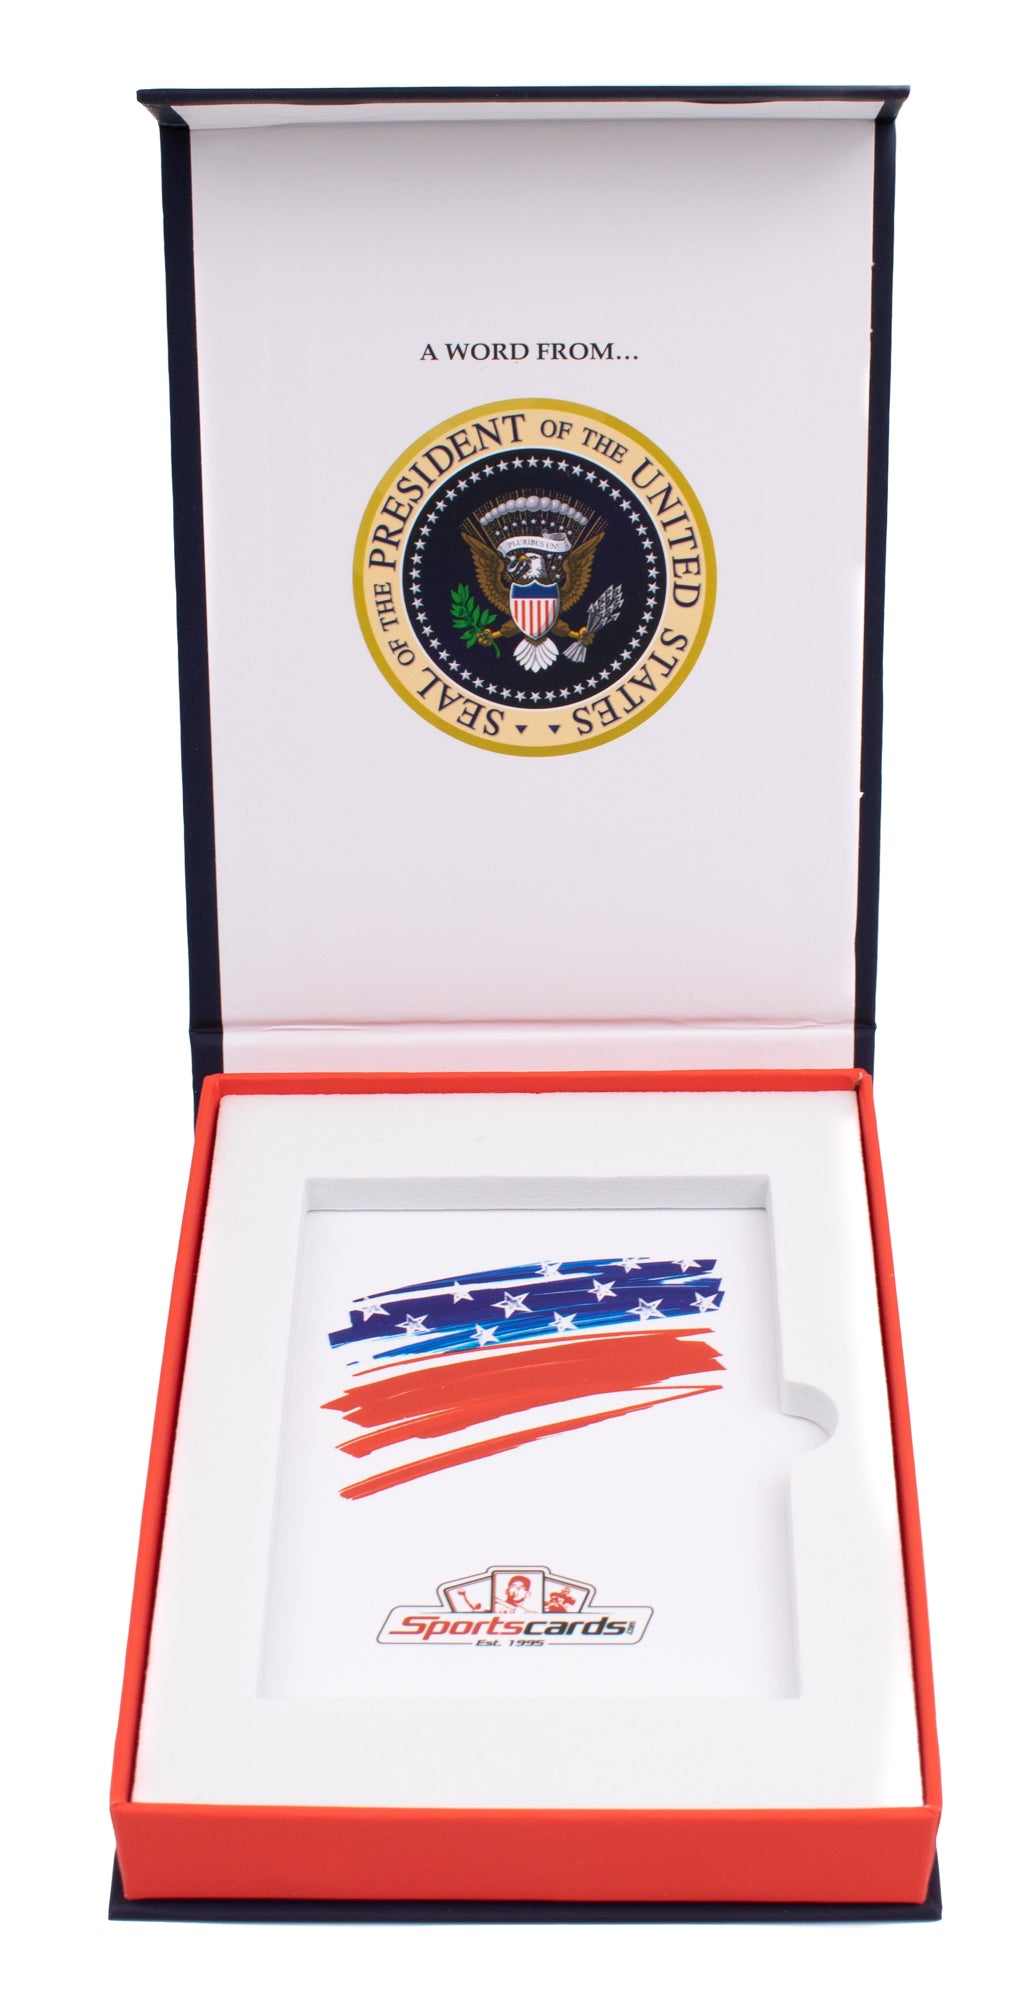 2020 A Word From The President - EMPTY Display Box